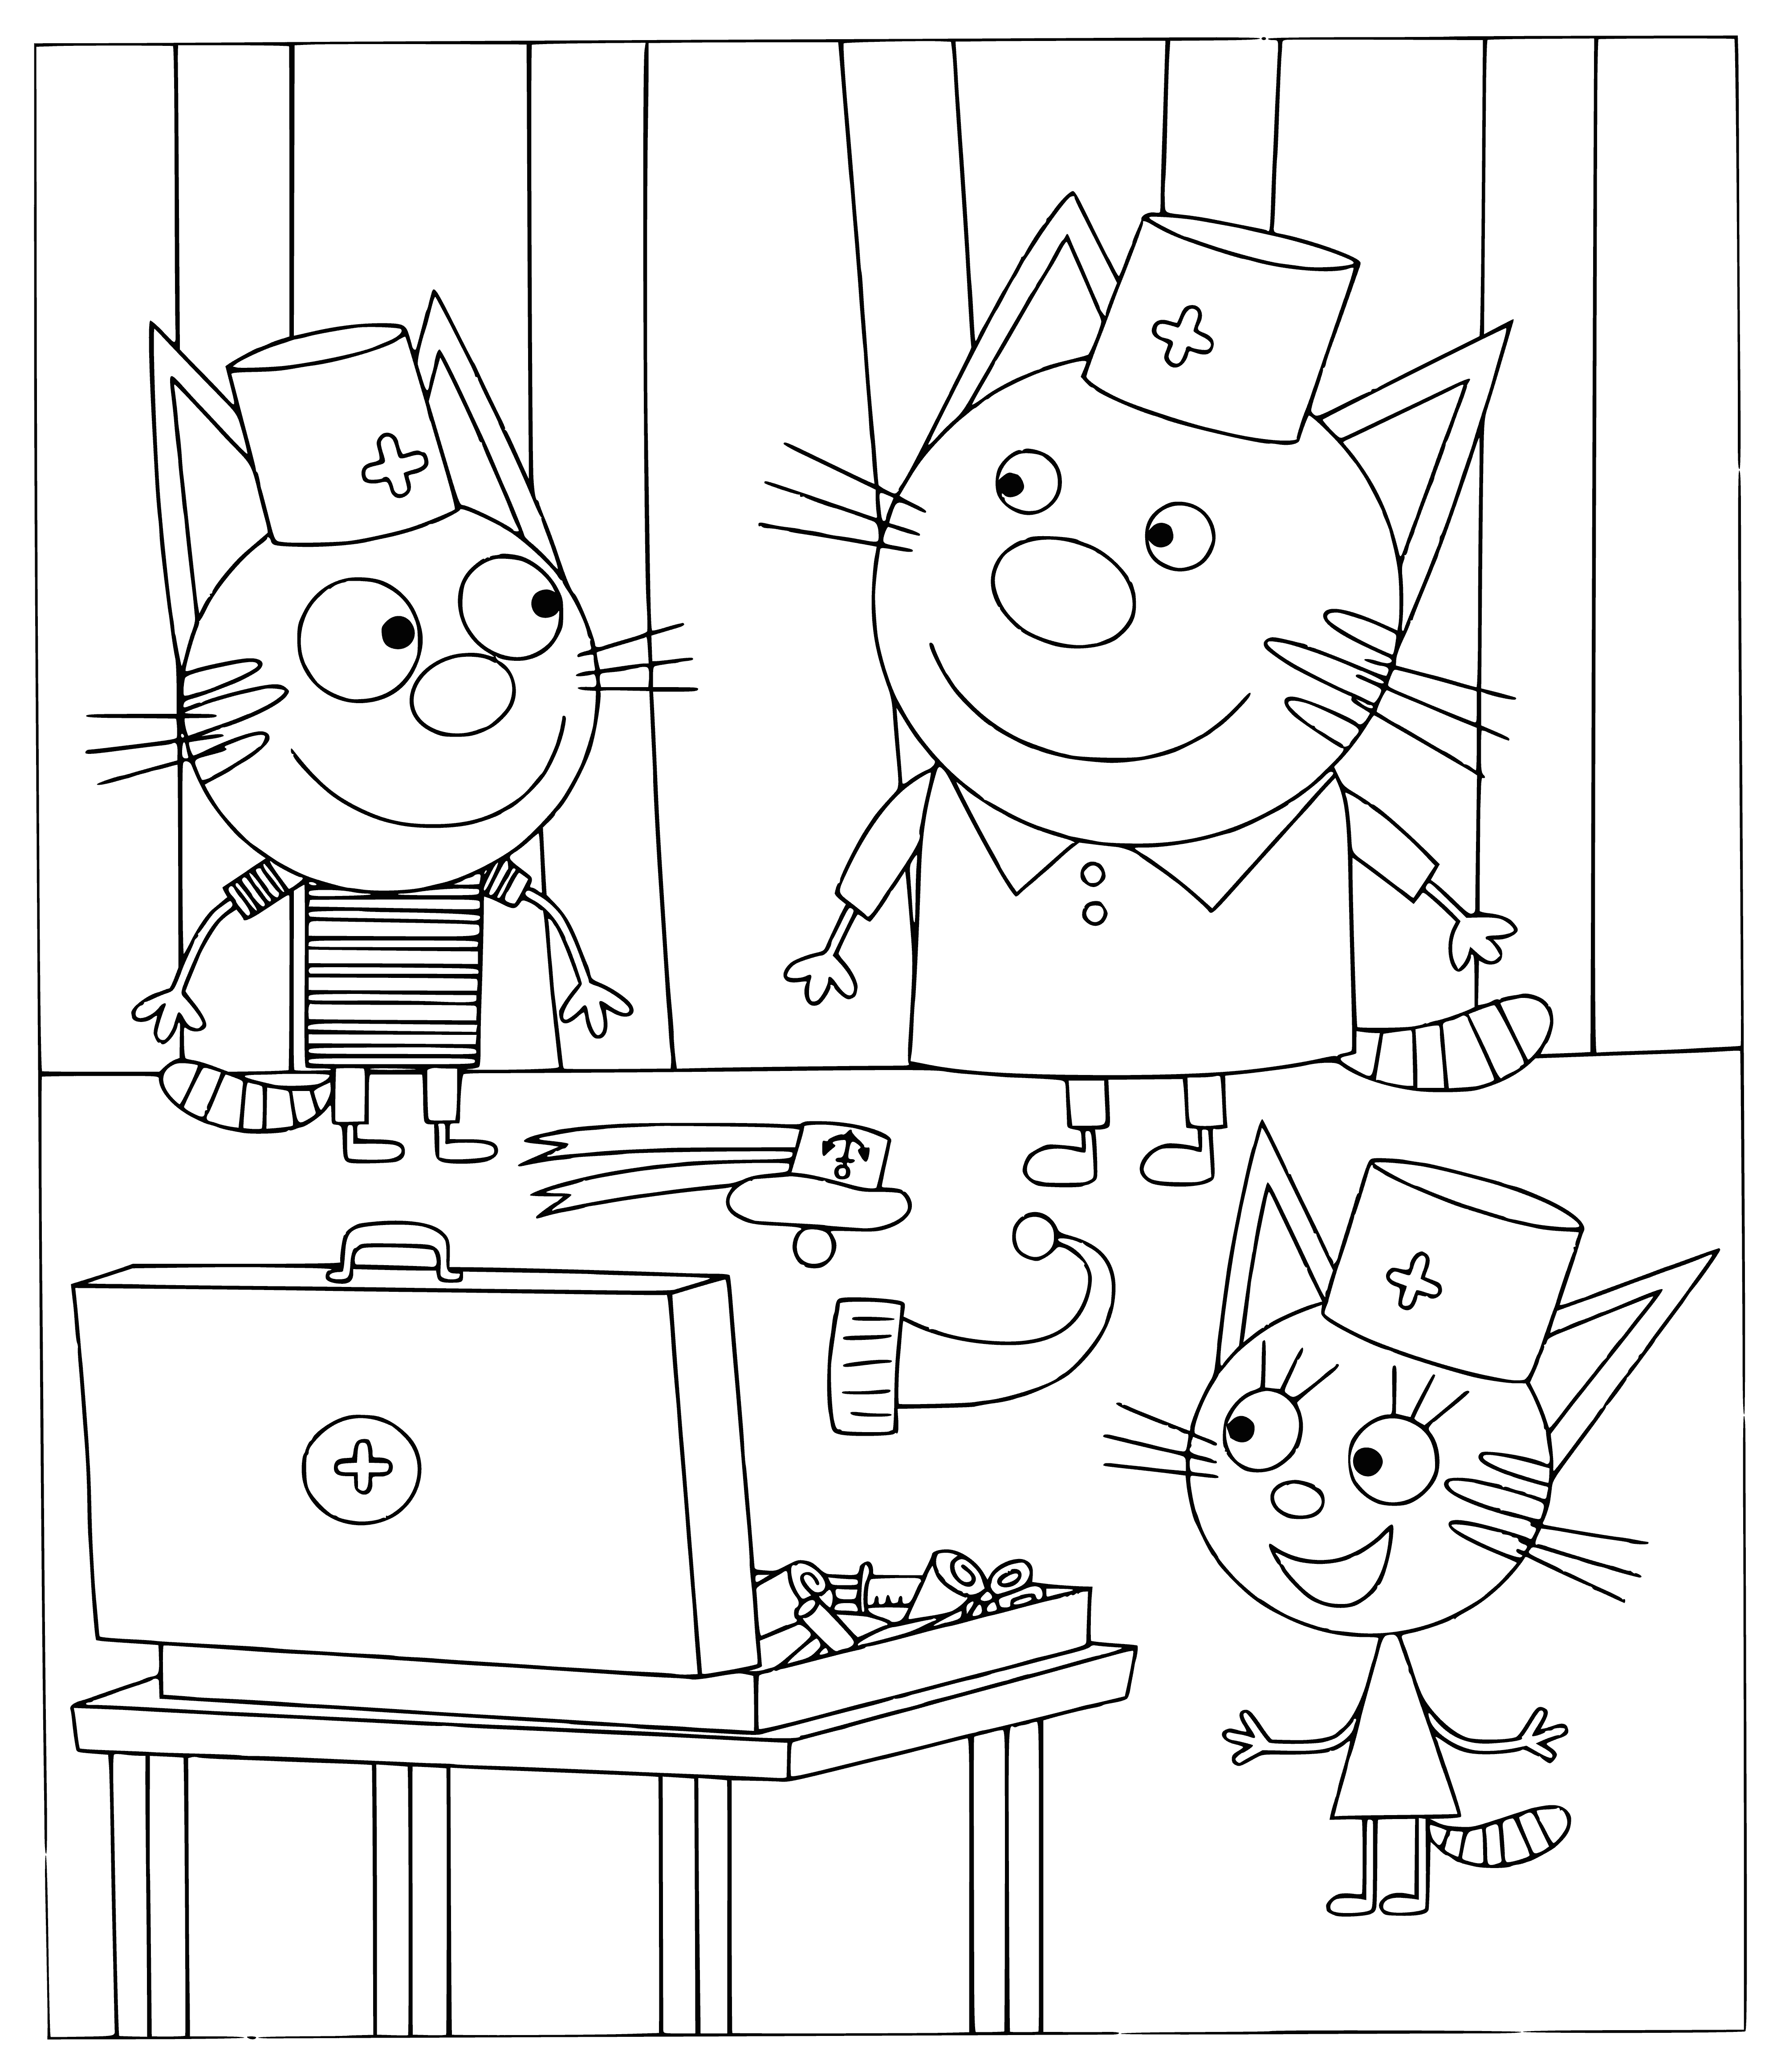 coloring page: Three cats in a doctor's office: black w/stethoscope, white w/headlamp, gray w/mask & coat.